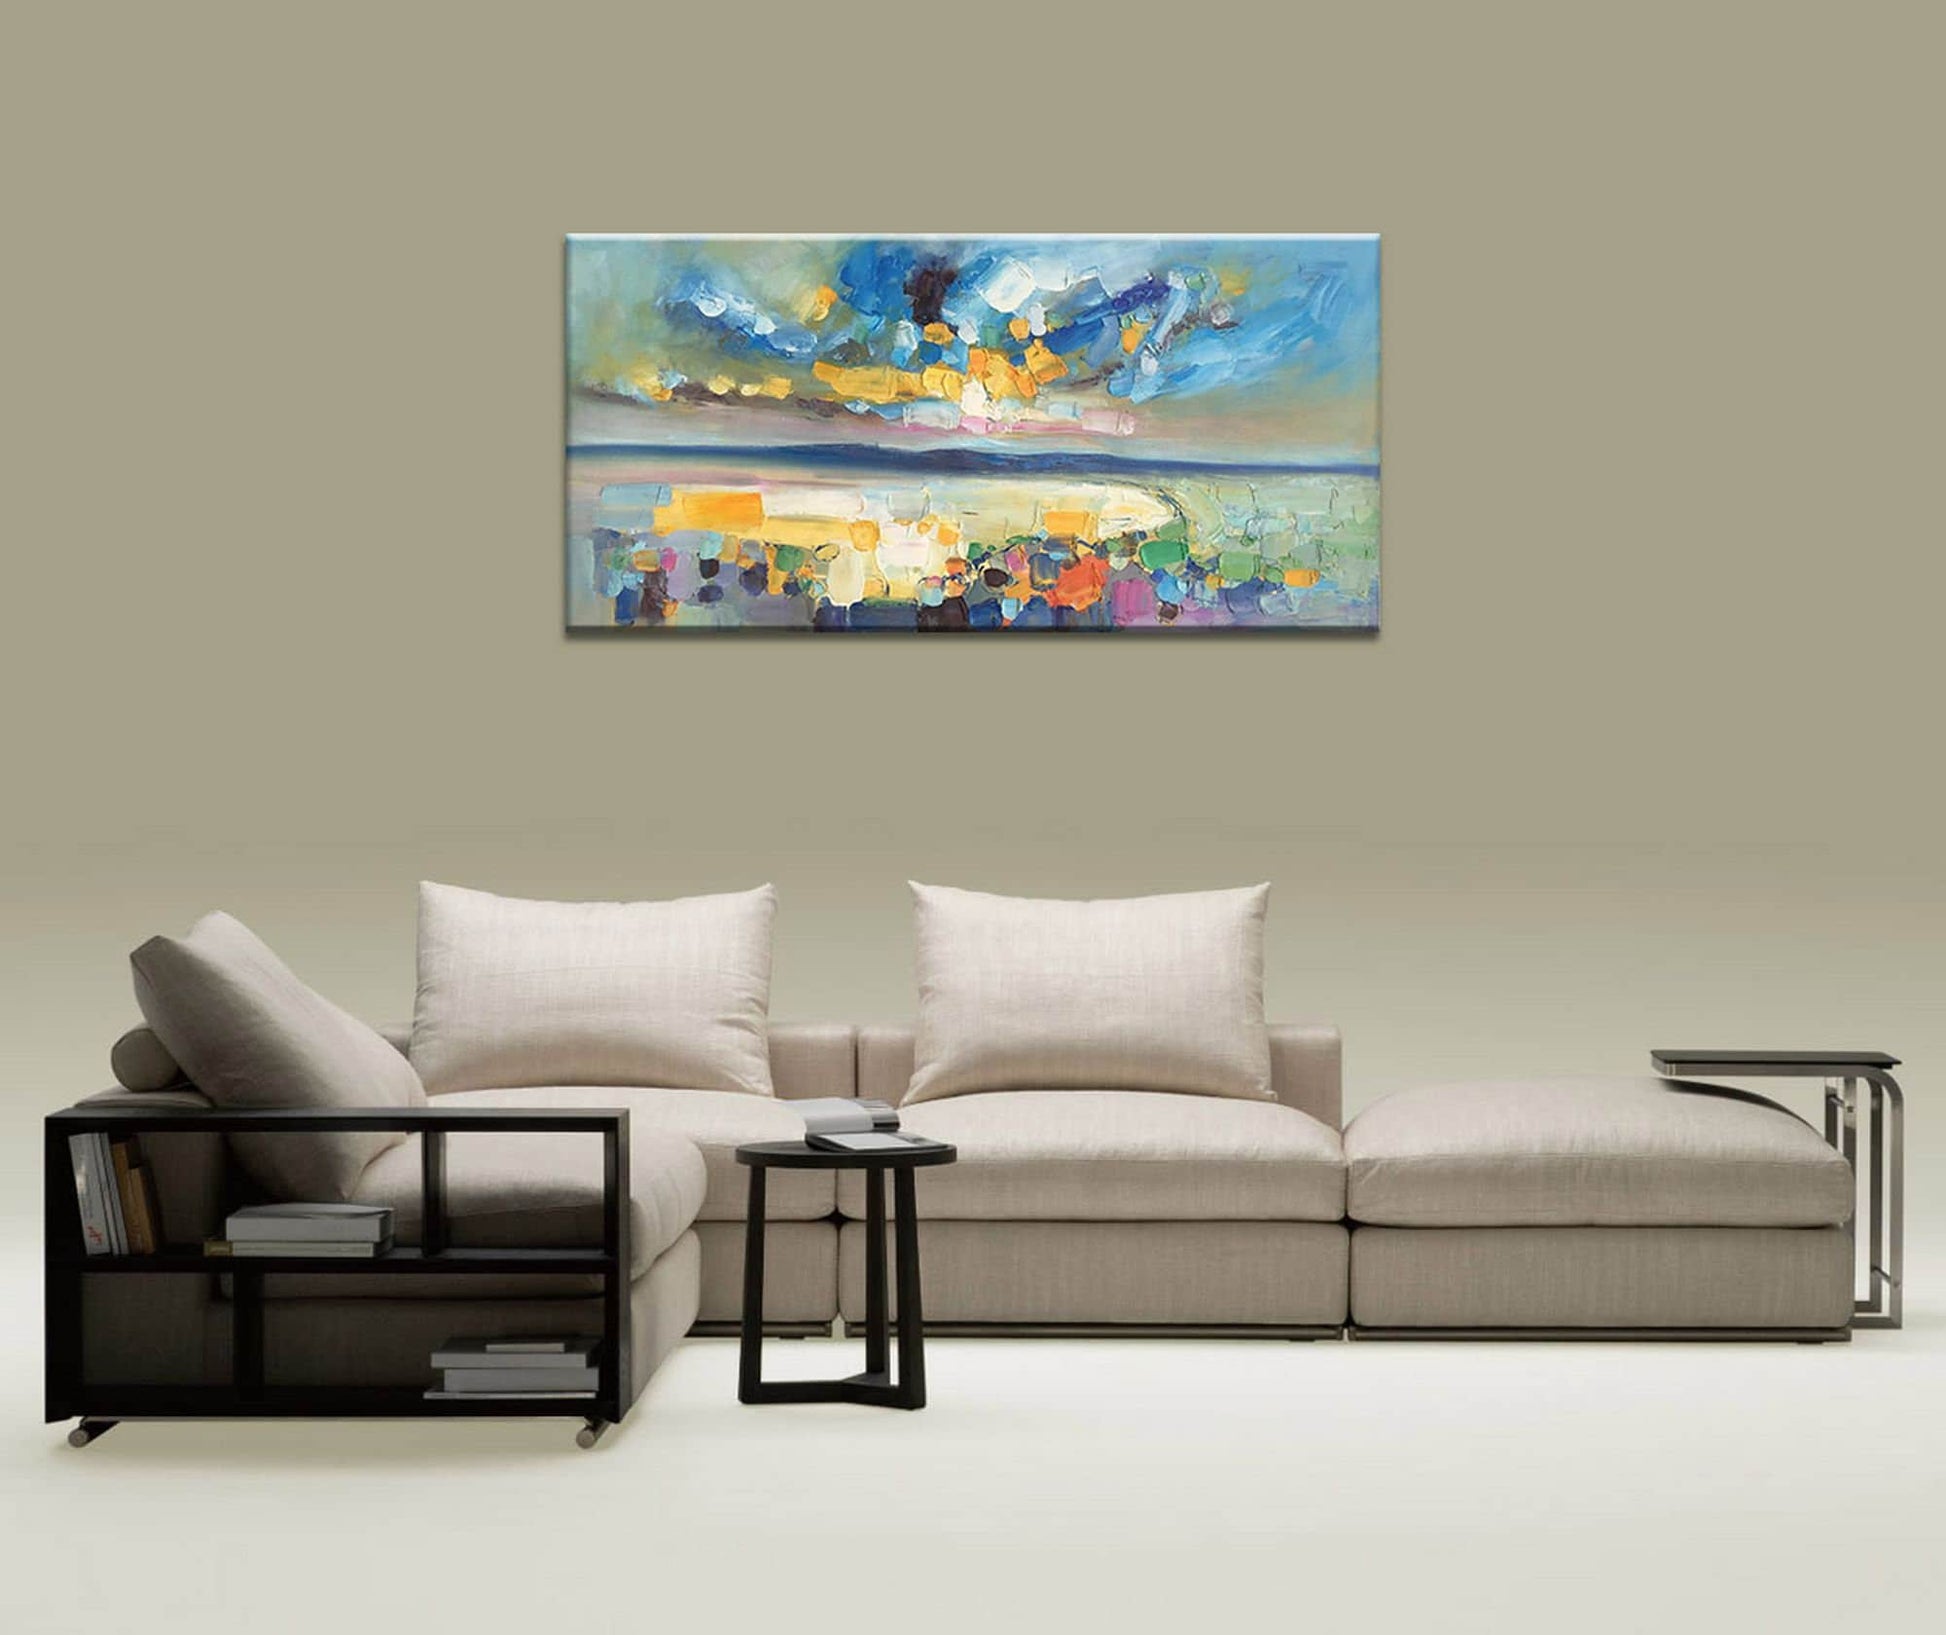 Abstract Painting Canvas Art, Oil Painting Original, Livingroom Art, Large Painting, Abstract Oil Painting, Modern Art, Family Wall Decor